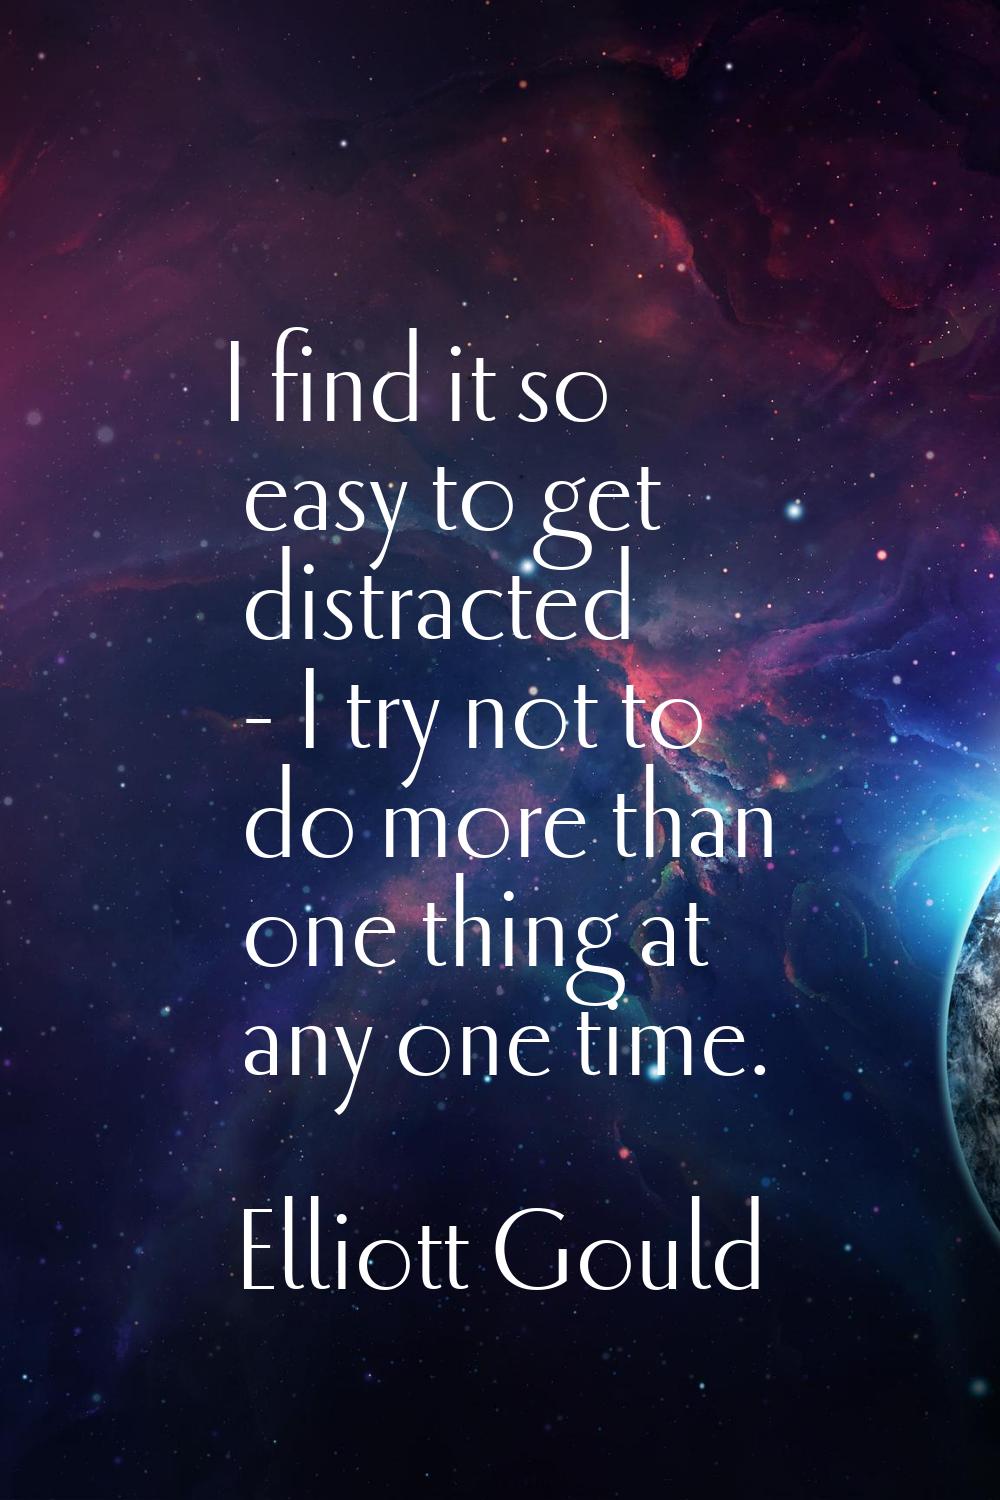 I find it so easy to get distracted - I try not to do more than one thing at any one time.